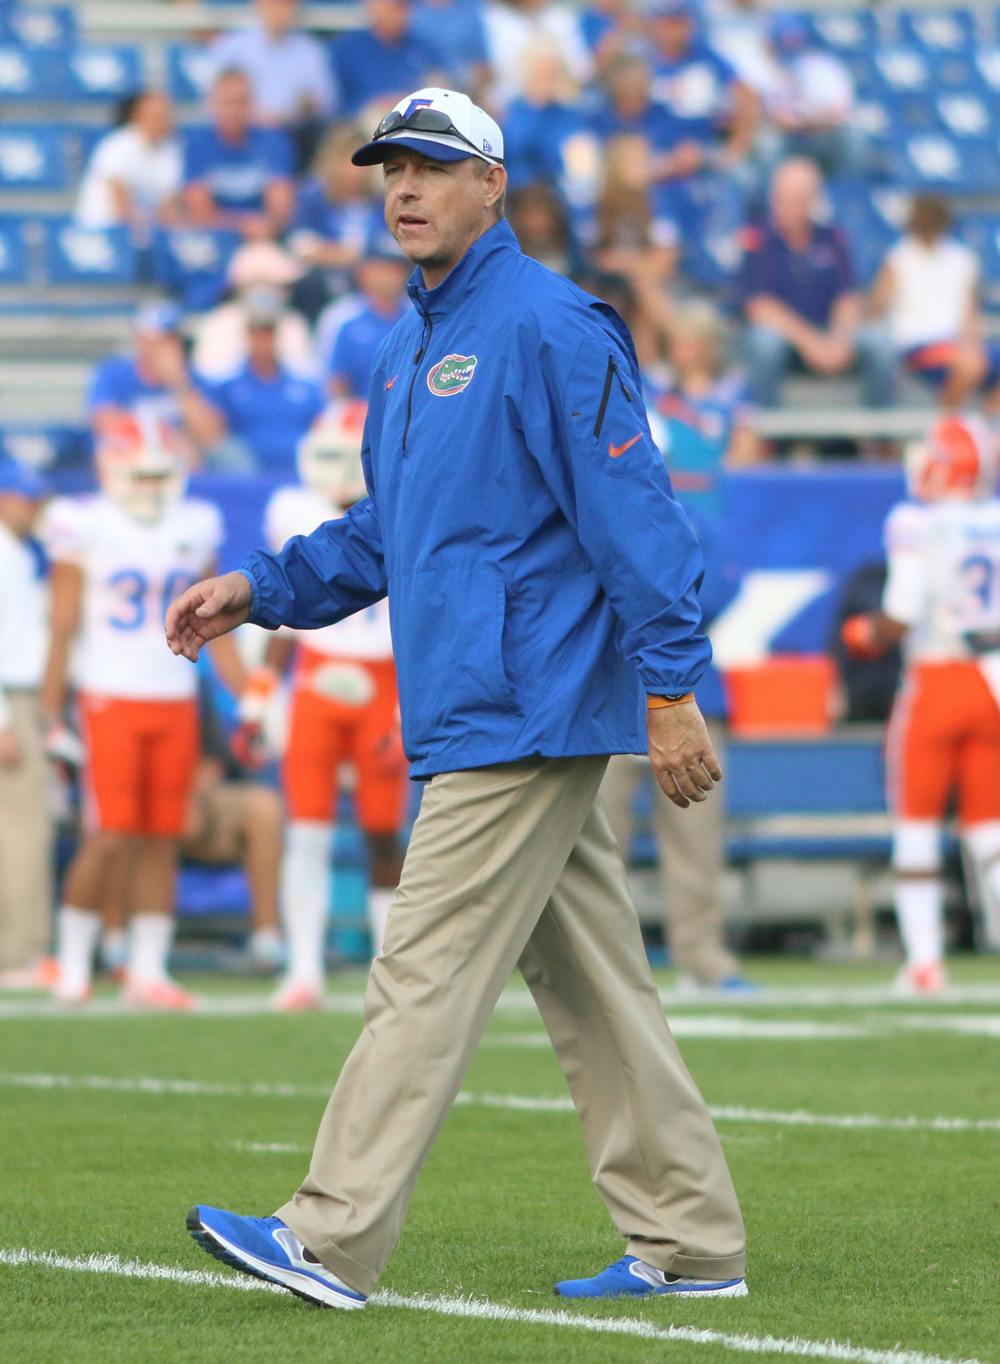 <p>Brent Pease walks on the field and watches warm-ups prior to Florida’s 24-7 victory against Kentucky on Saturday at Commonwealth Stadium in Lexington, Ky. Florida’s second-year offensive coordinator took the Gators’ quarterbacks for a nature walk near their hotel prior to the game.</p>